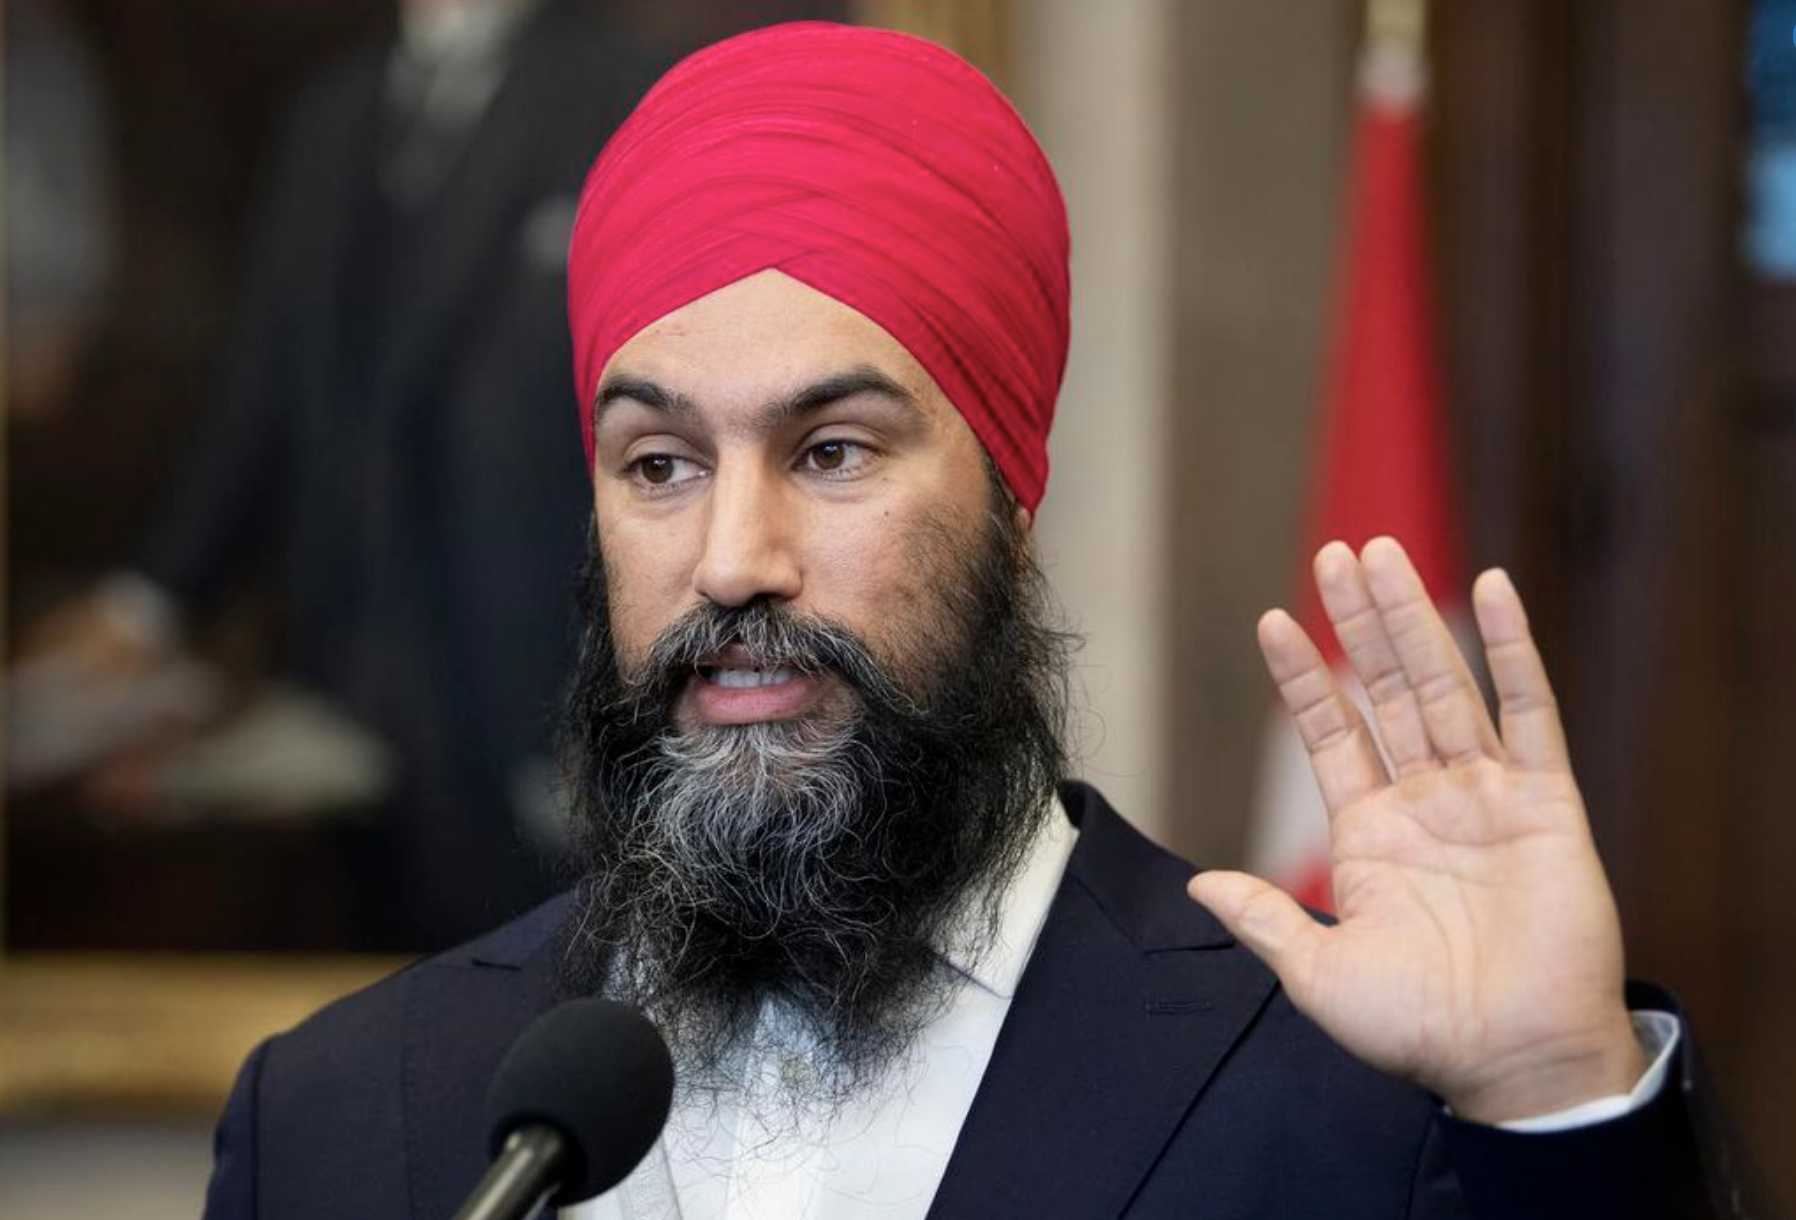 NDP Leader Jagmeet Singh requested an Emergency Debate on the discovery of the graves of 215 children